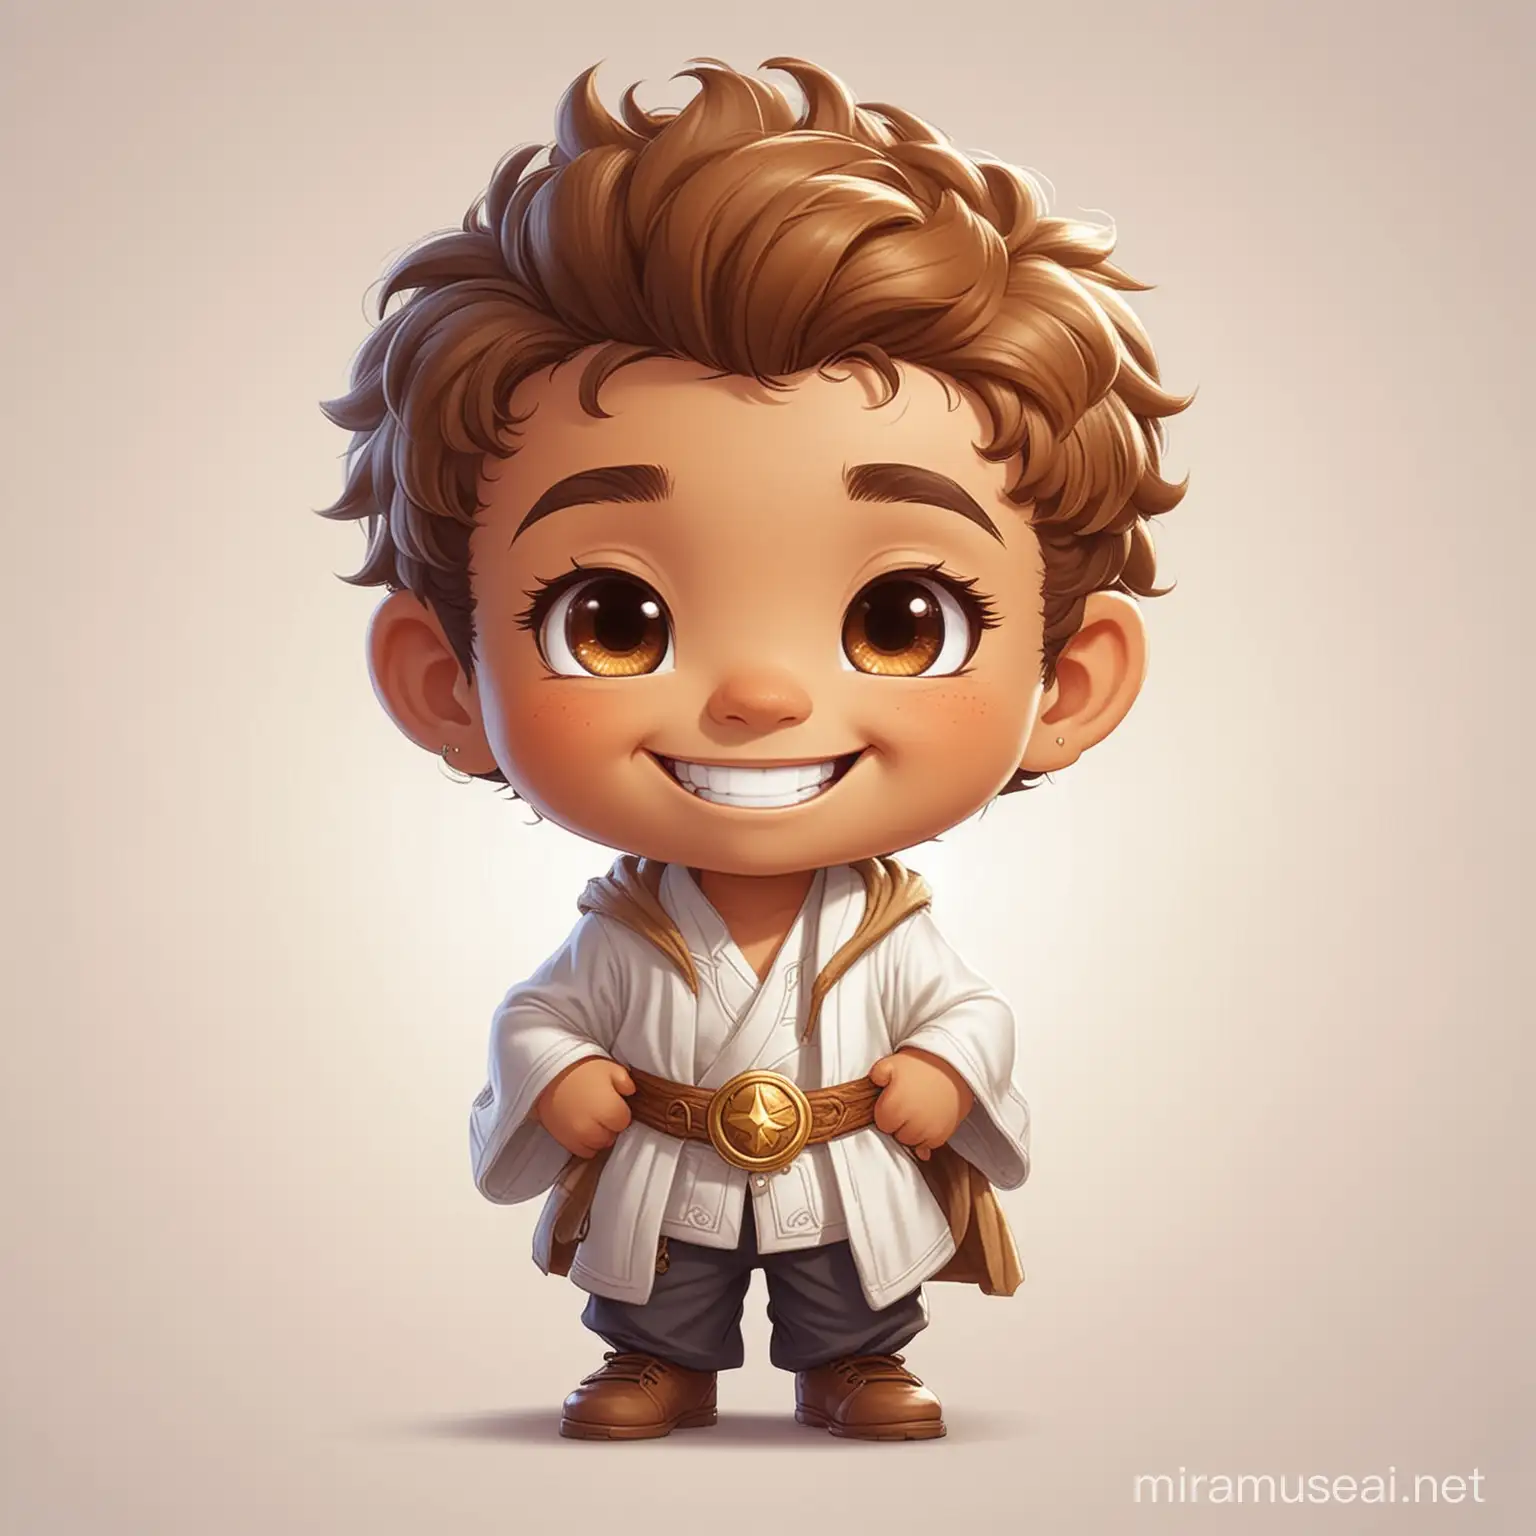 male child magical healer with light brown skin wearing white smiling on a white background chibi style